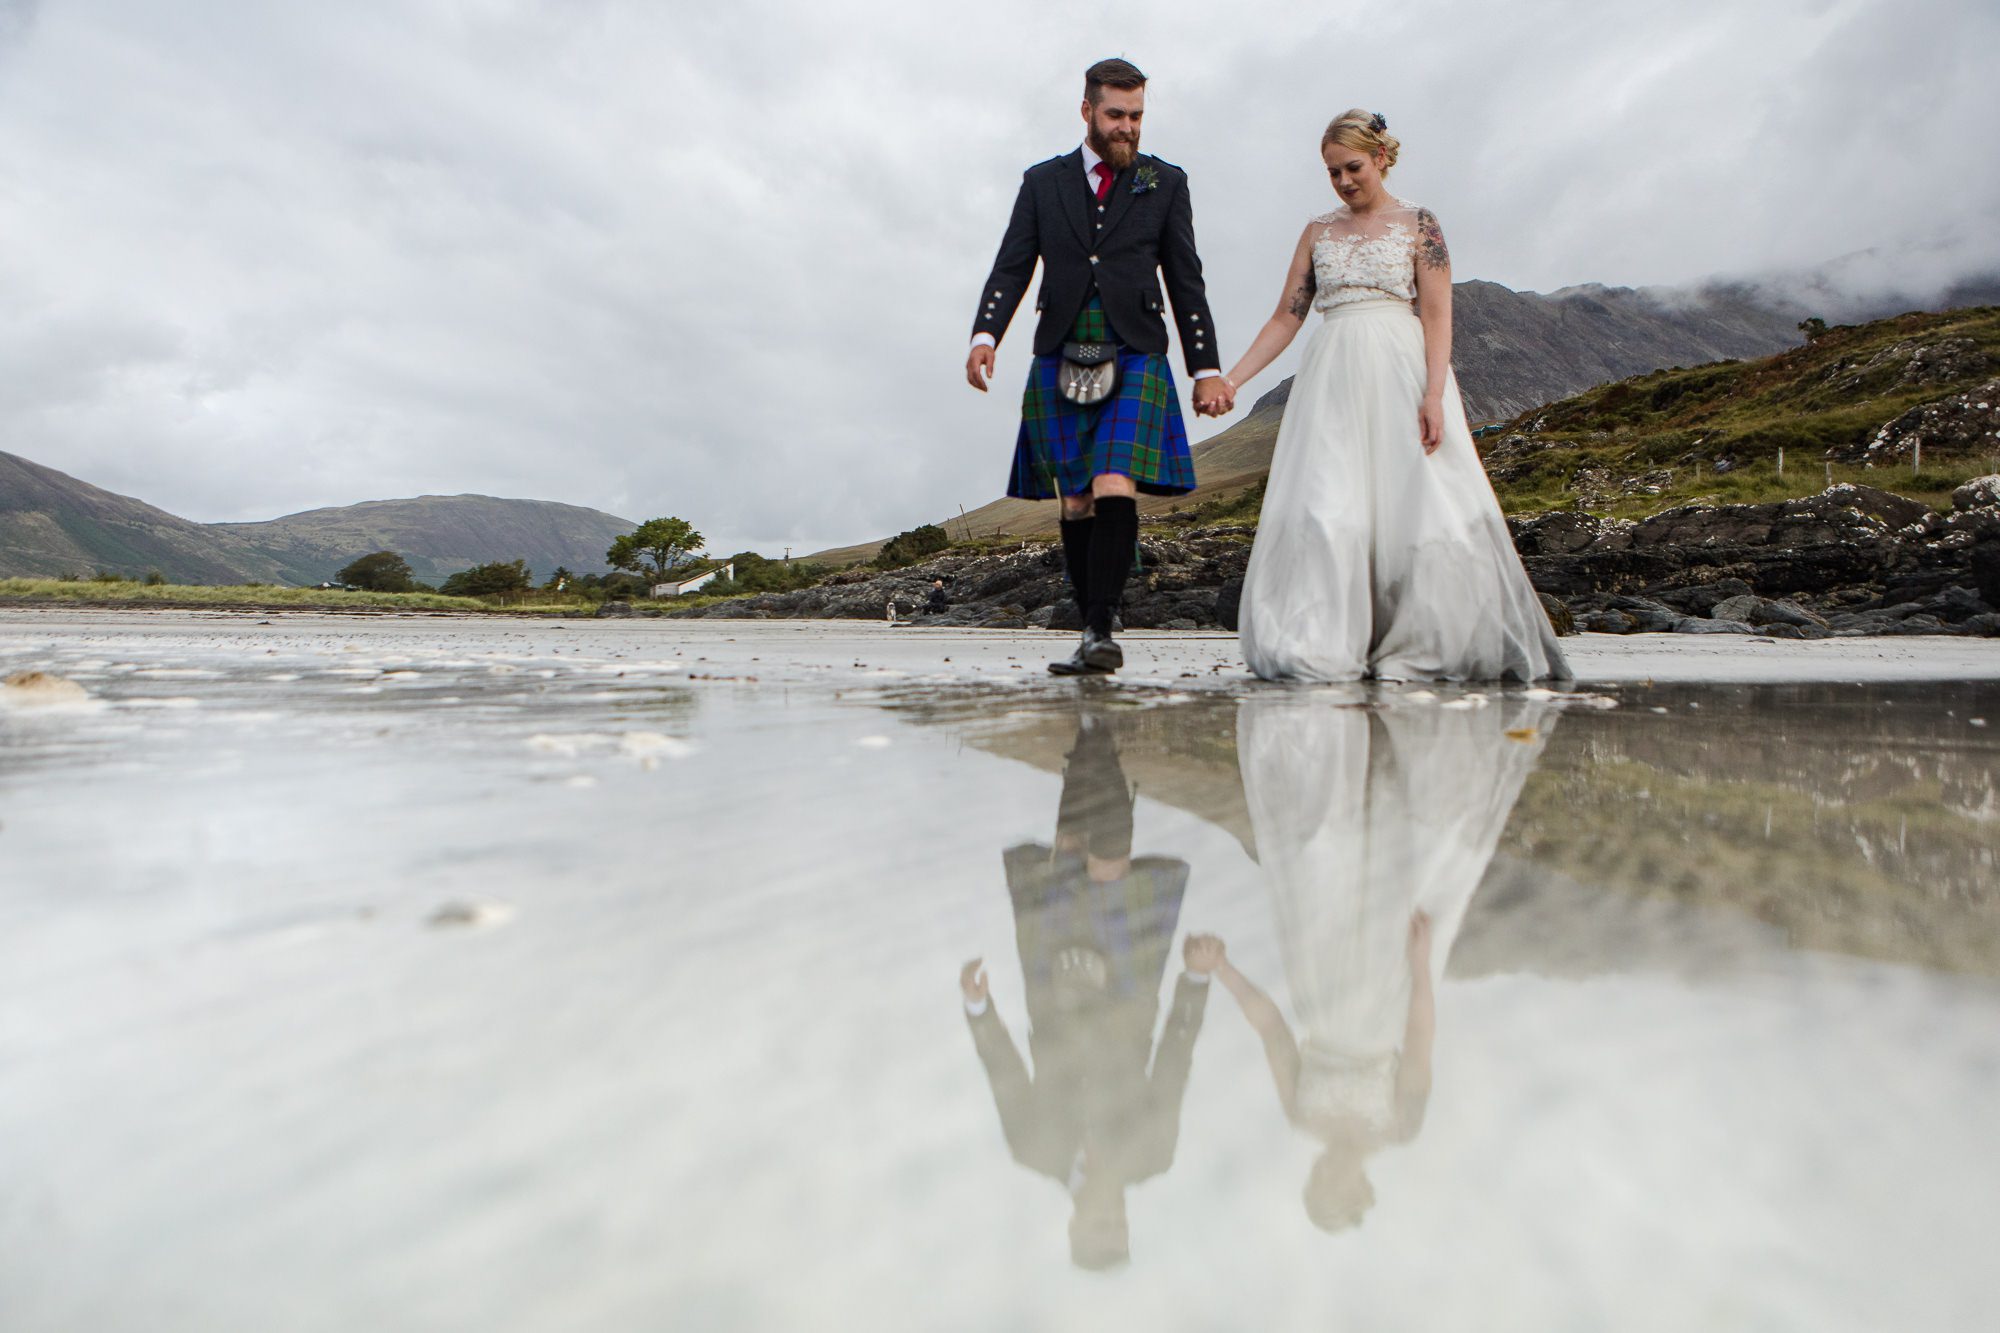 Bride and groom reflected in volcanic sands Glenbrittle Isle of Skye